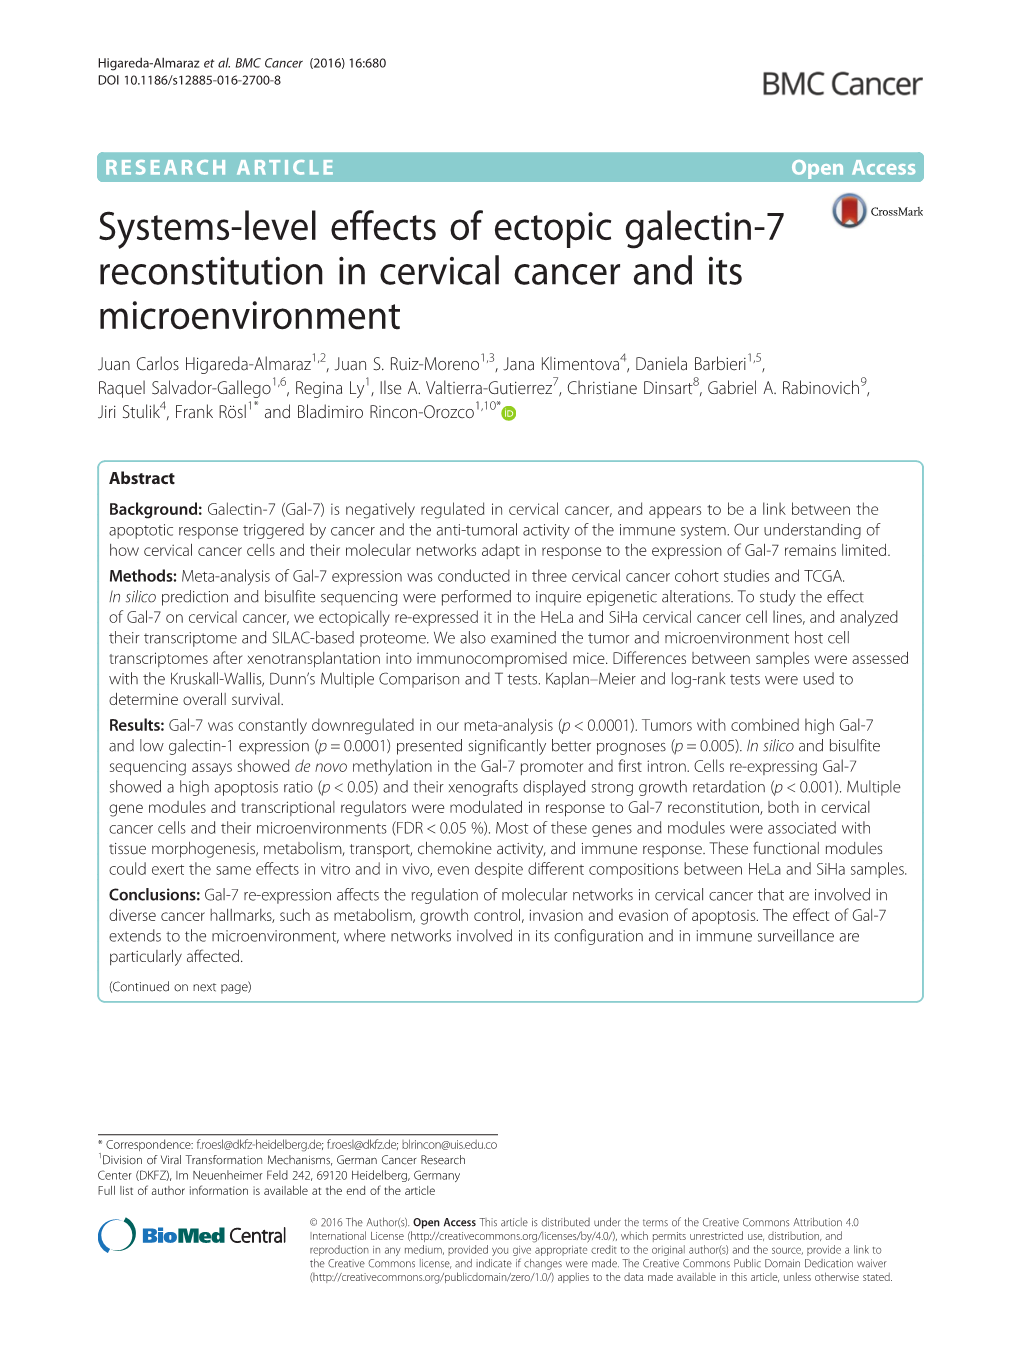 Systems-Level Effects of Ectopic Galectin-7 Reconstitution in Cervical Cancer and Its Microenvironment Juan Carlos Higareda-Almaraz1,2, Juan S